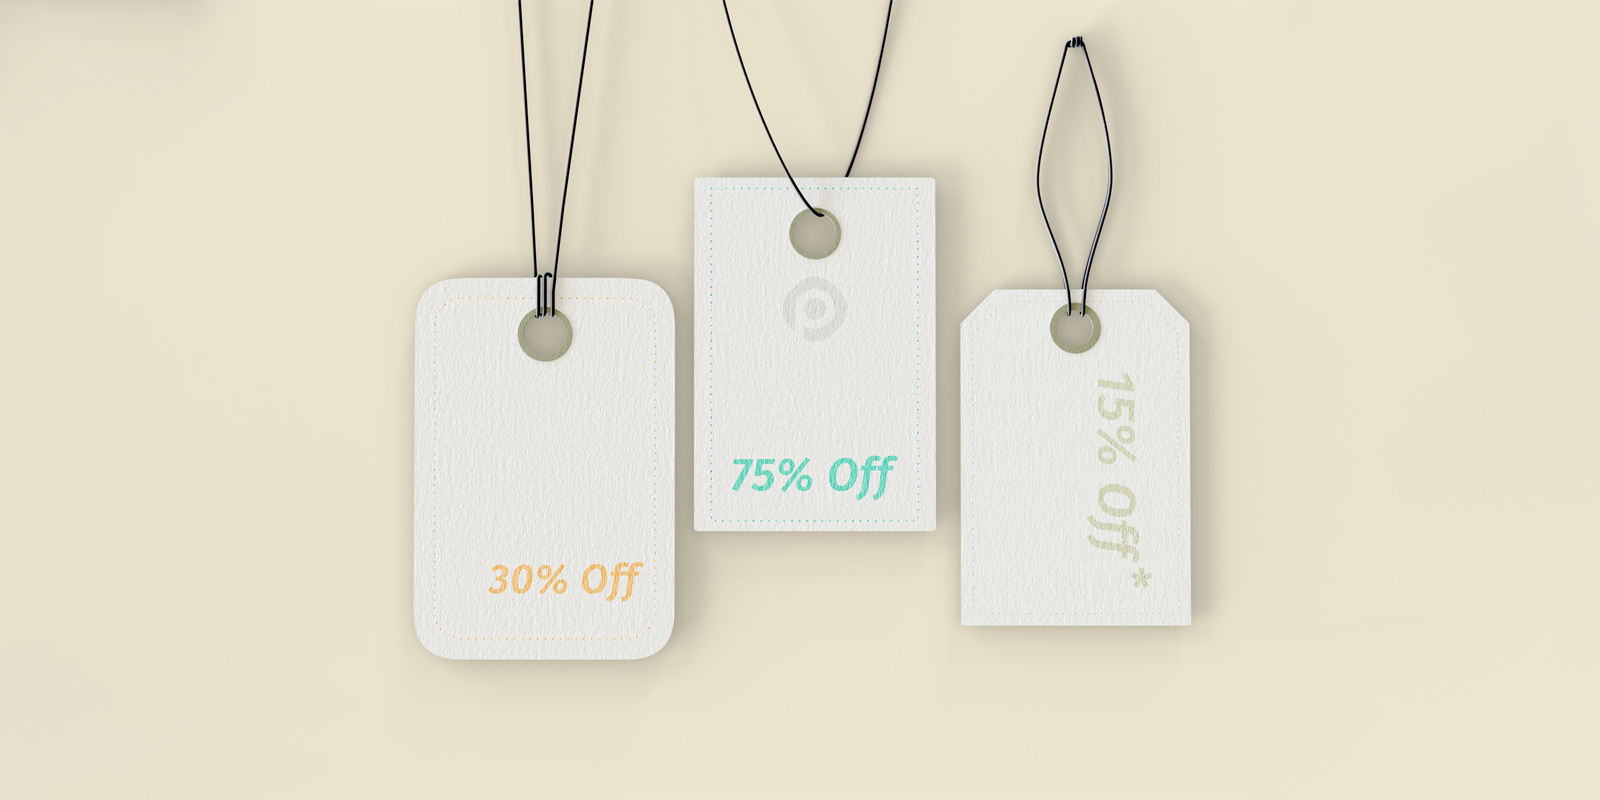 Discount labels in Newcastle - Print with Pagerr